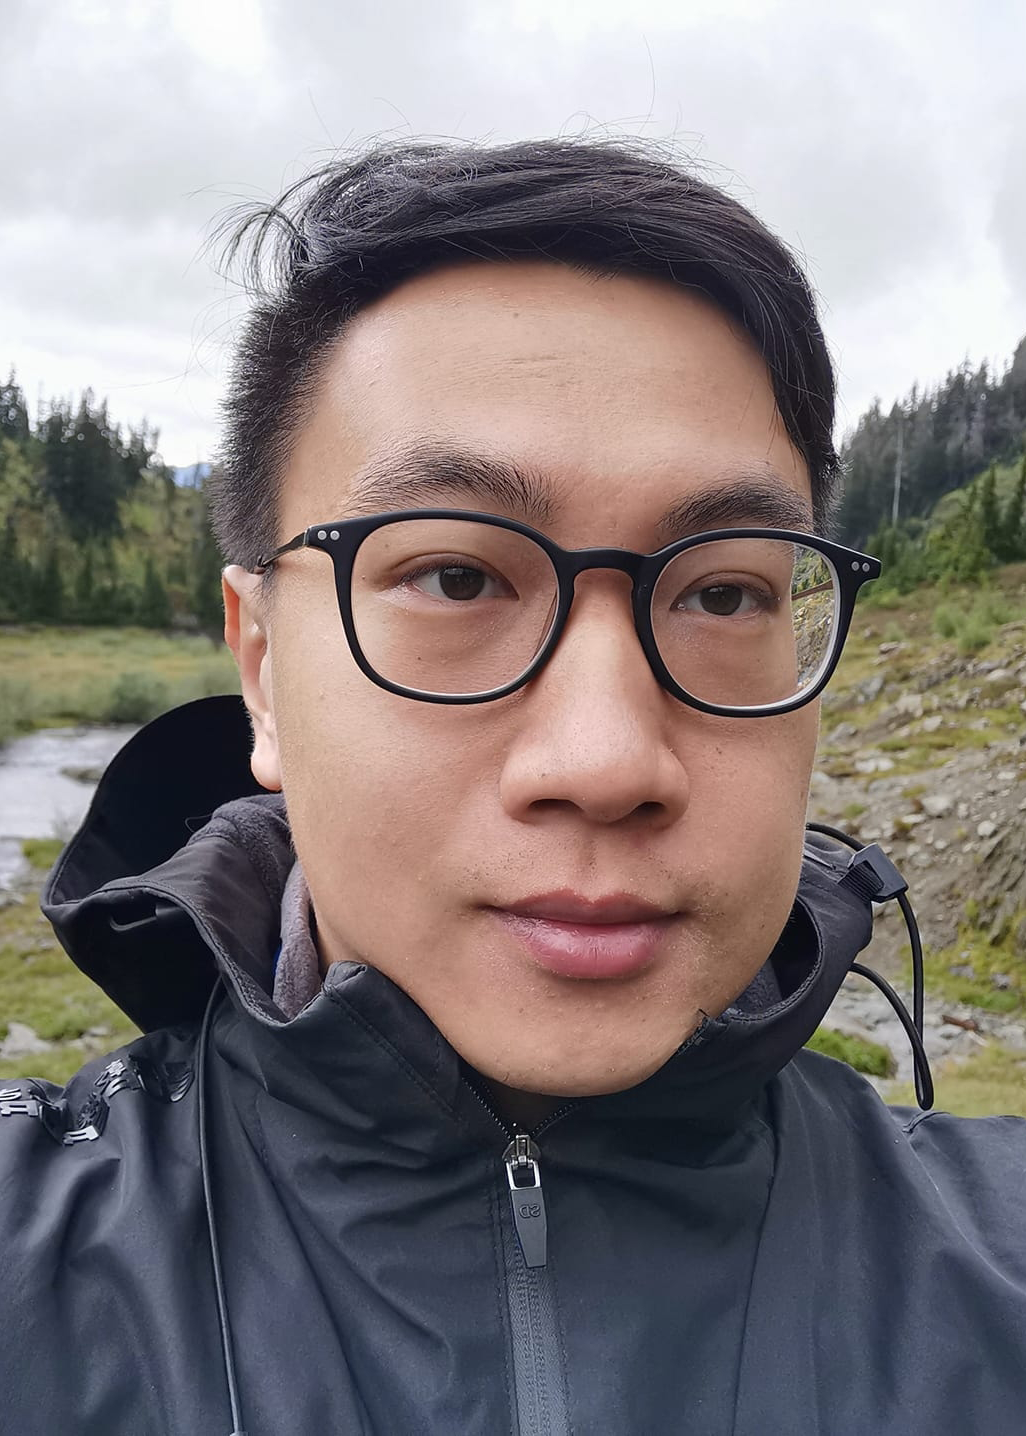 Portrait photo of Andrew Han, UBC alumnus (BA'14). Andrew is wearing glasses and a black waterproof jacket. His background indicates that he is outdoors.